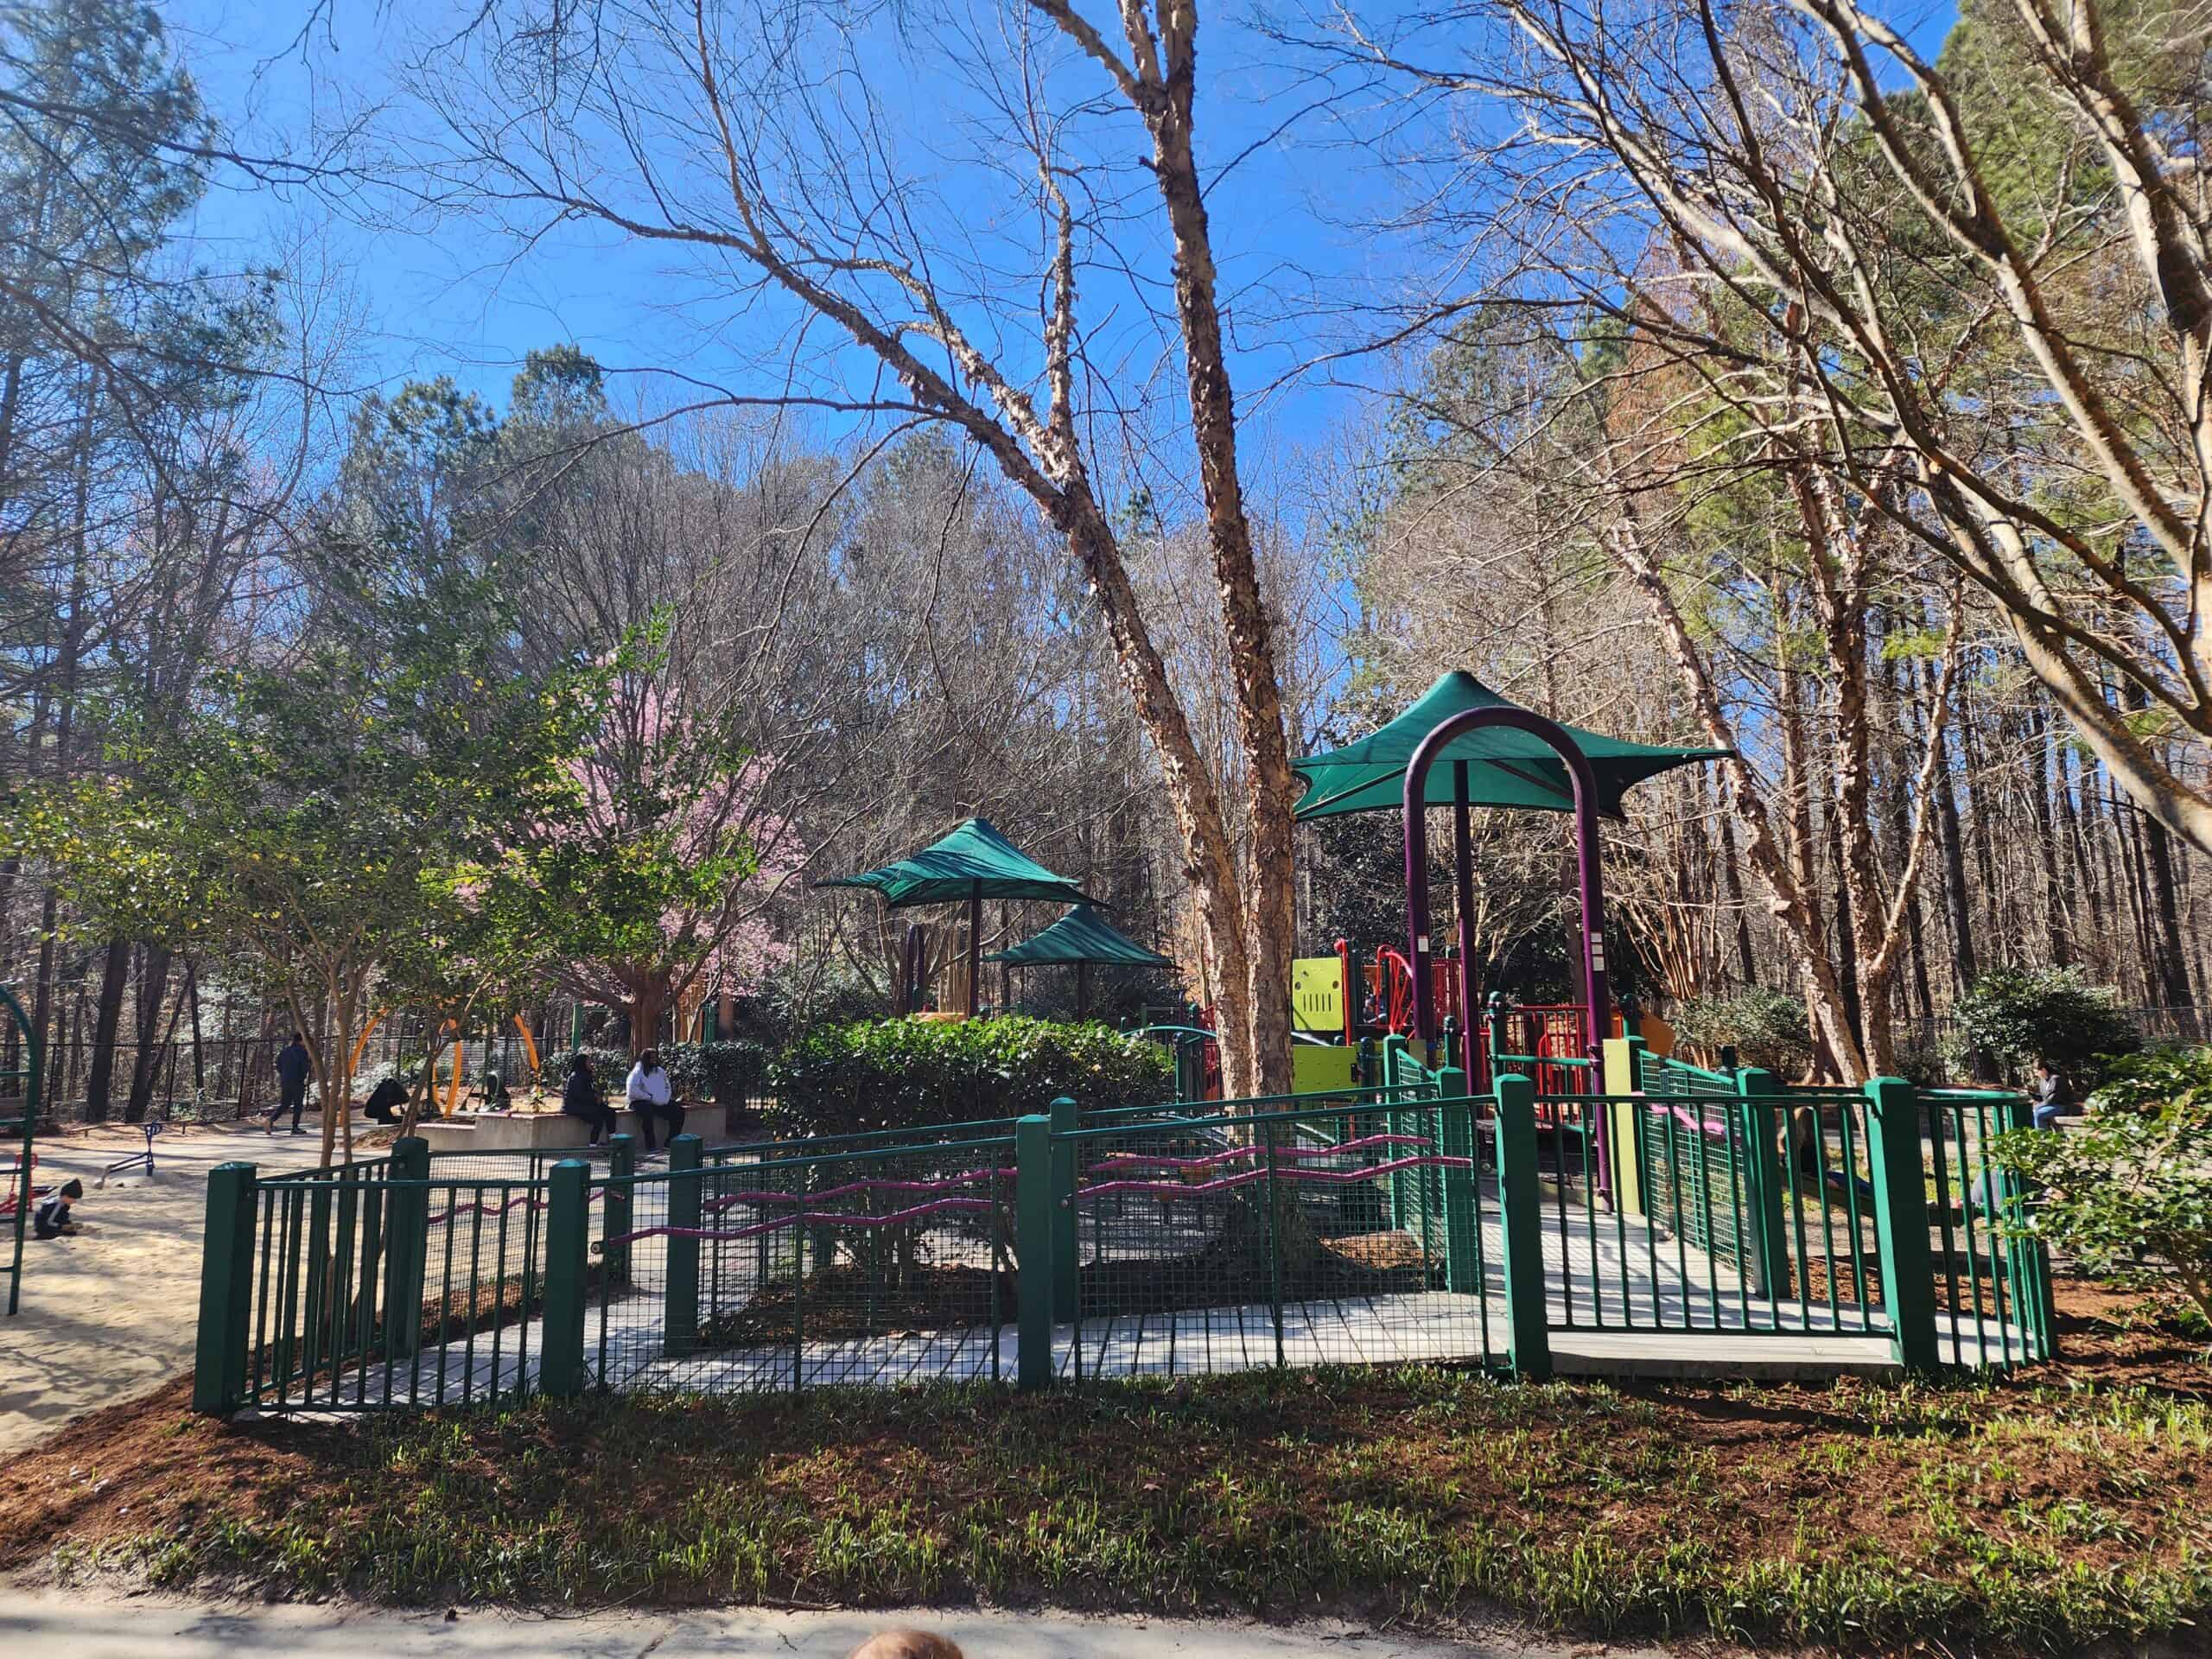 A scenic view of a playground in Cary, NC, under a clear blue sky. The park is framed by lush trees and blooming pink flowers, with children enjoying the green and red play structures. The fenced perimeter ensures a safe play environment, highlighting the natural and well-maintained setting.